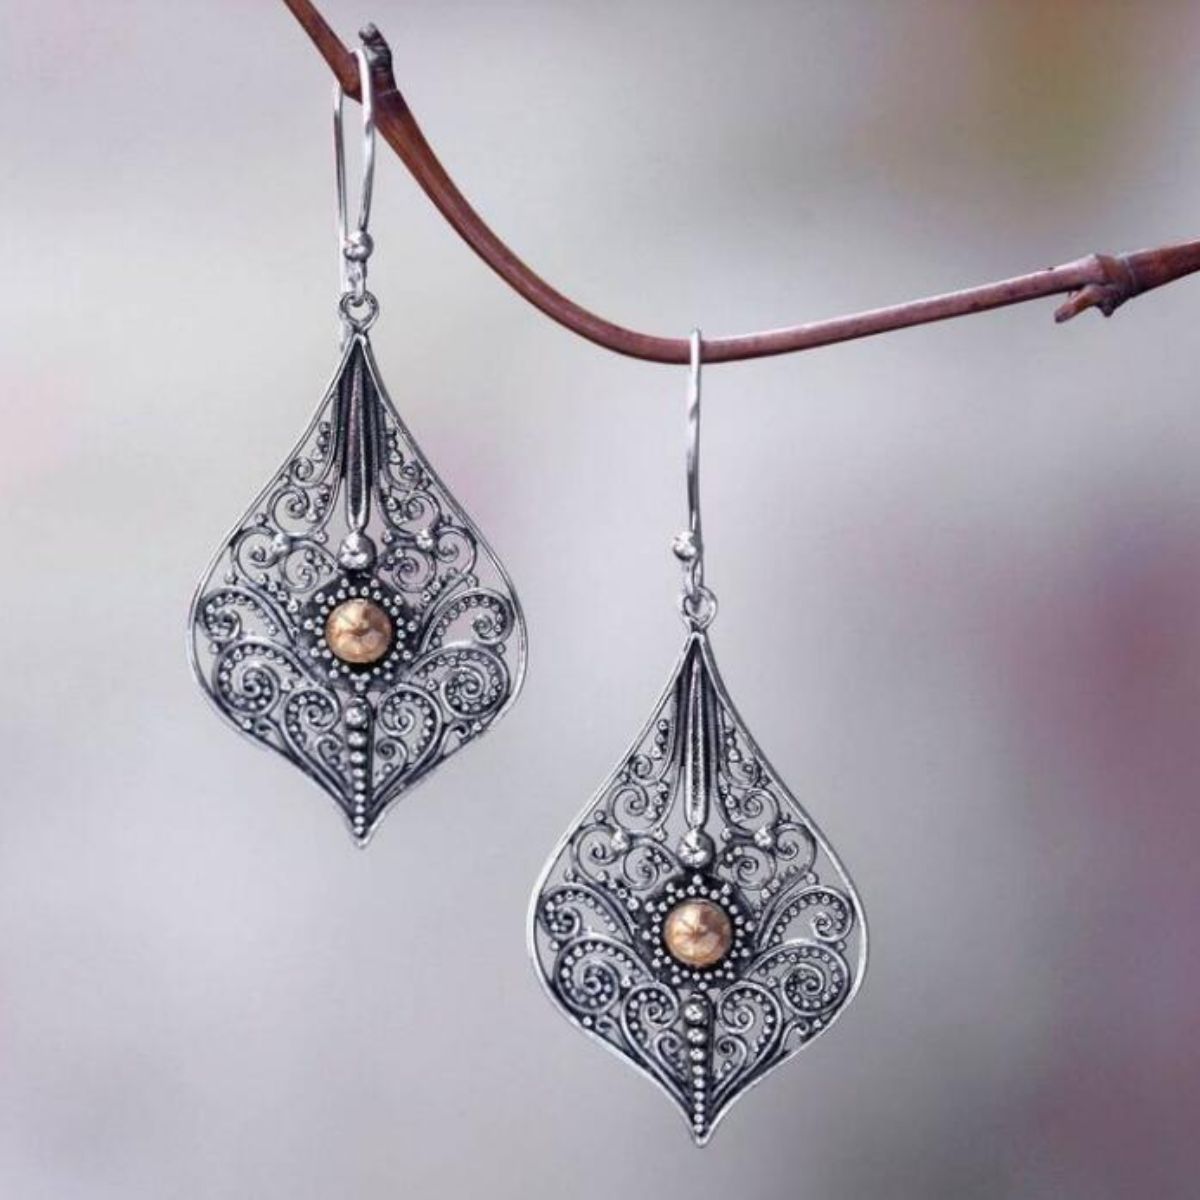 Teardrop earrings featuring a detailed filigree pattern and a central pearl bead